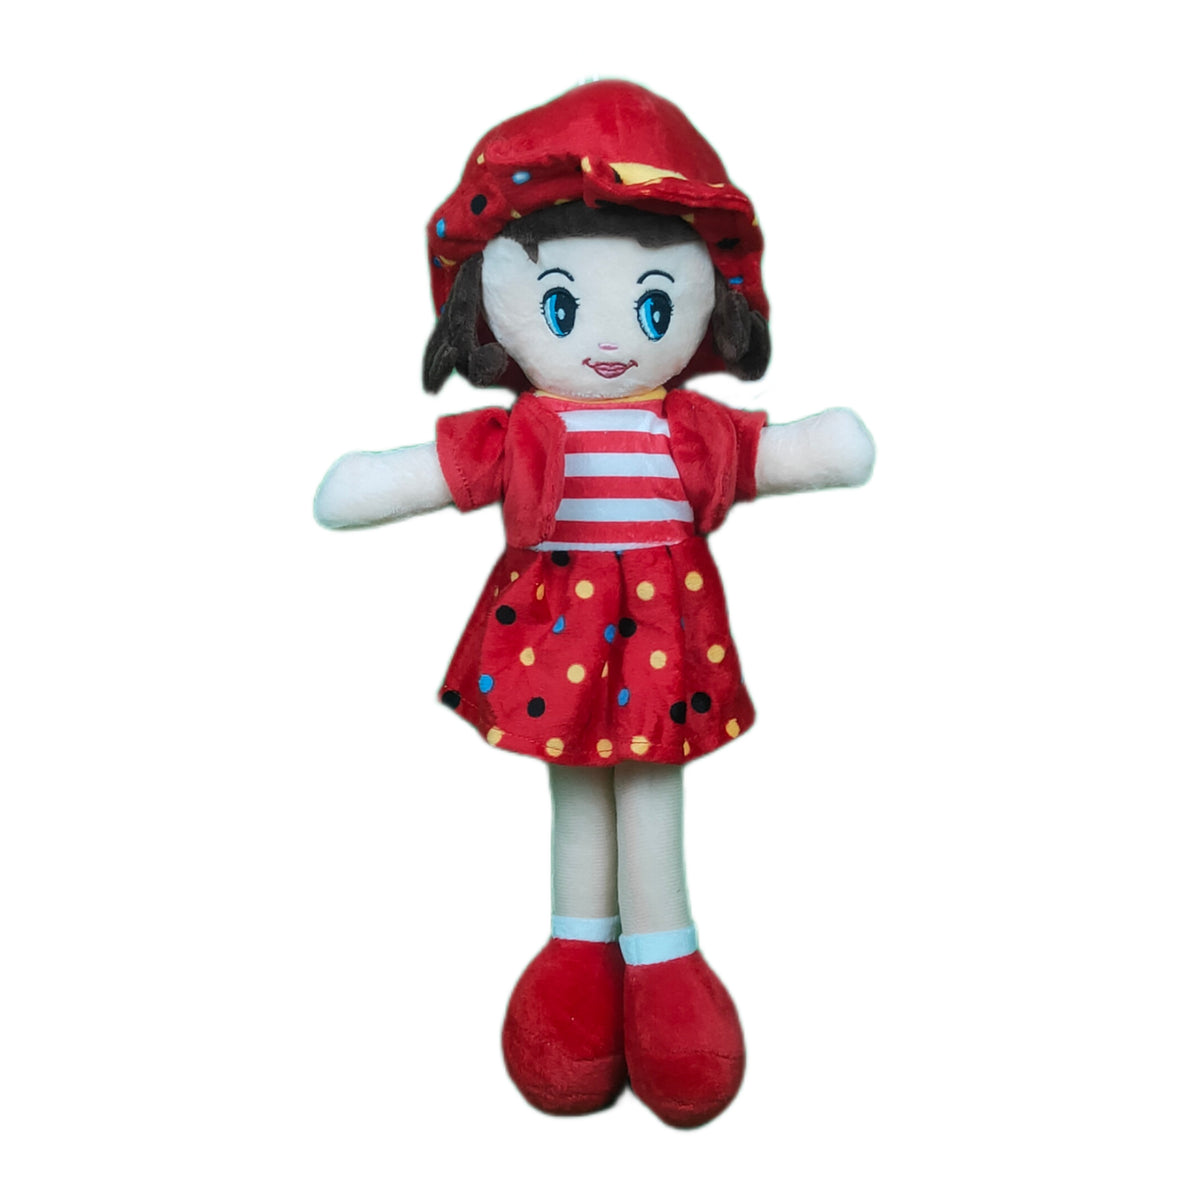 Play Hour Winky Rag Doll Plush Soft Toy Wearing Red Dress for Ages 3 Years and Up, 40cm